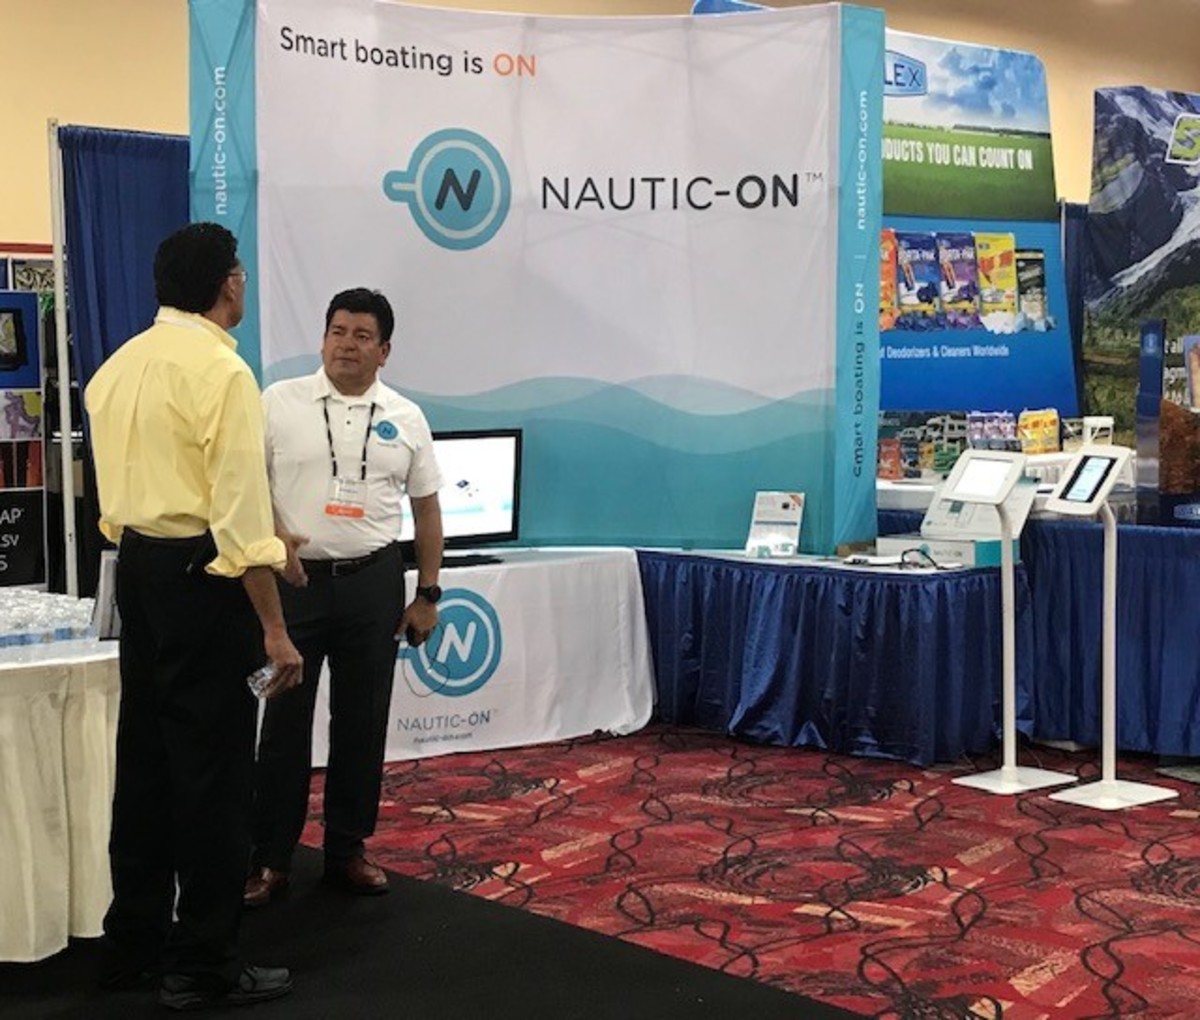 The Nautic-On display at the Land ’N’ Sea dealer show in Las Vegas.